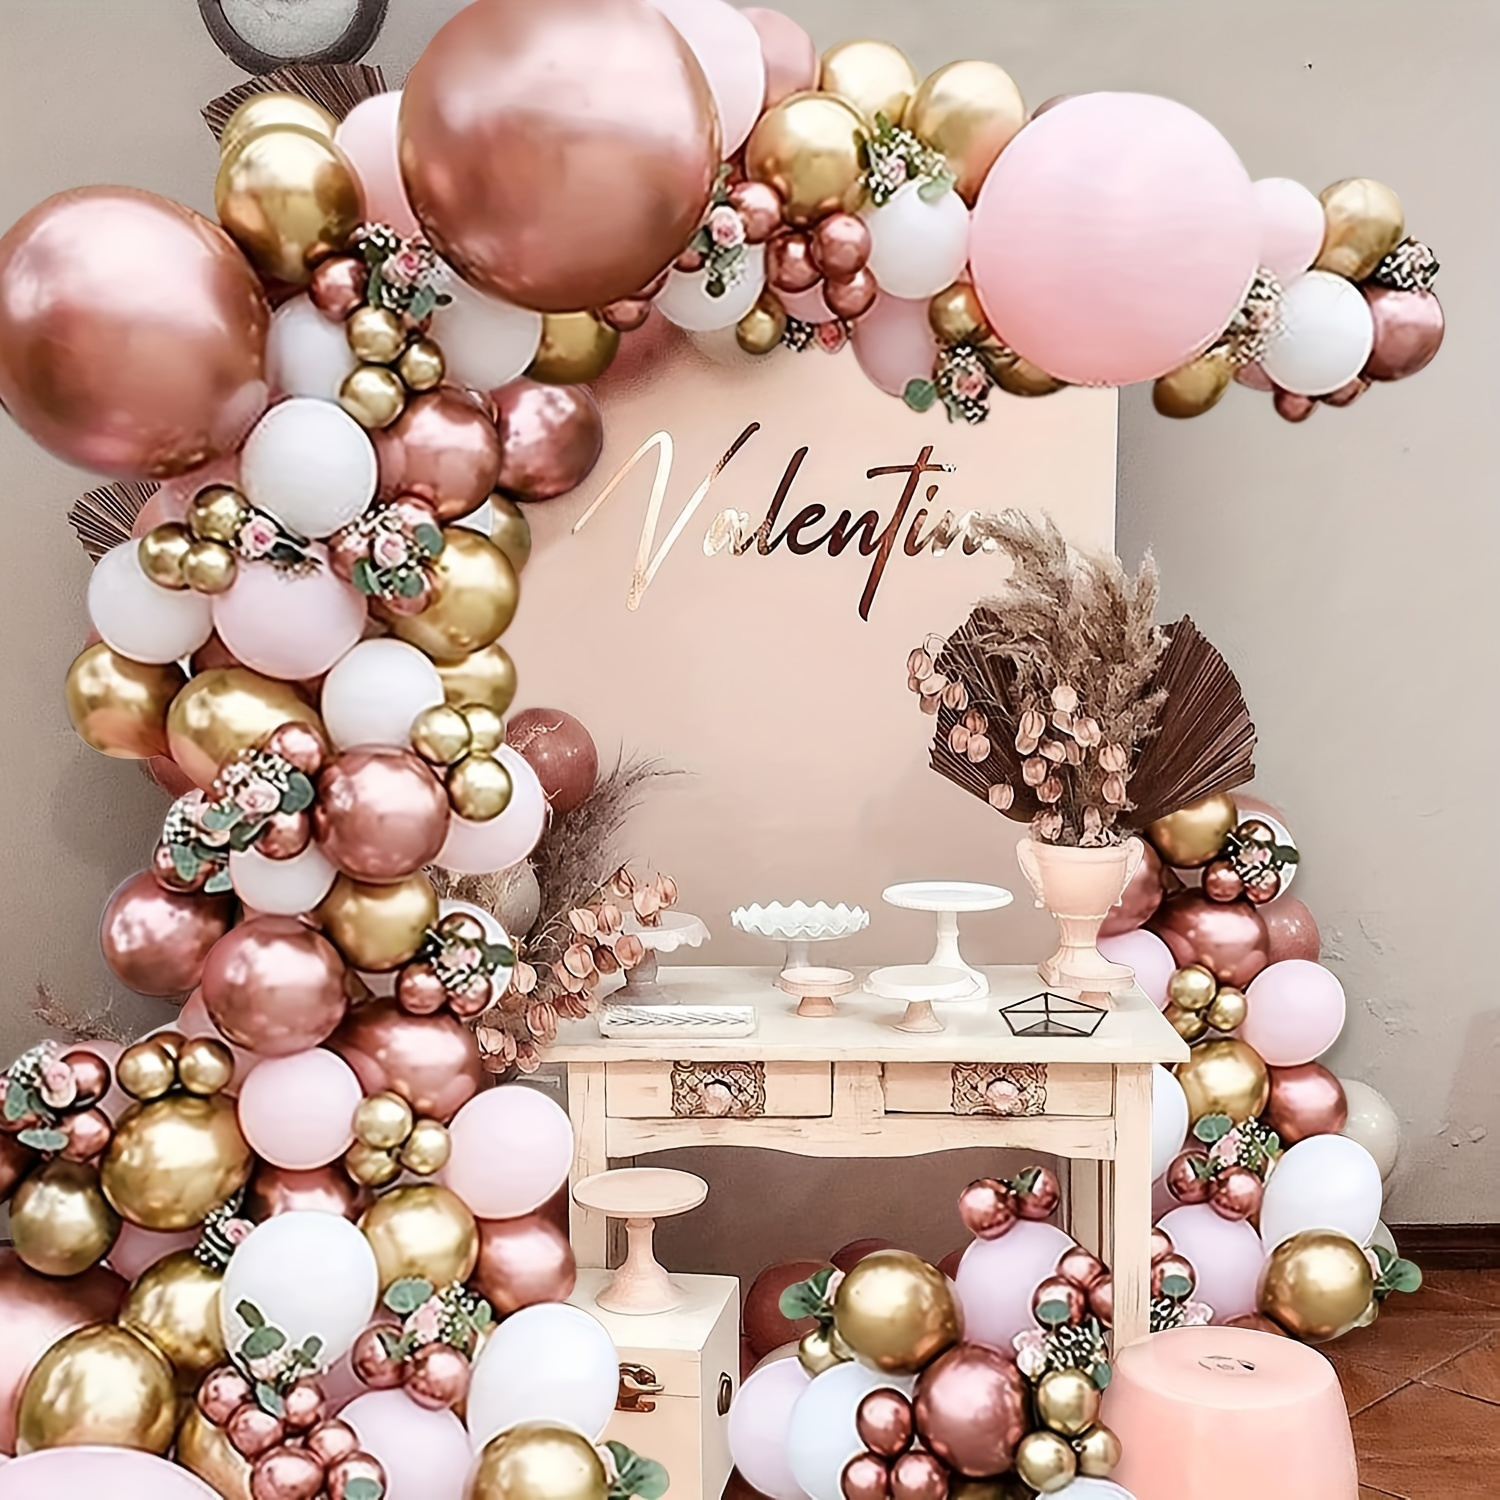 

143-piece Pink Balloon Arch Kit - Rose Hue & Golden Tones For Weddings, Bridal Showers, Birthdays & Anniversaries - Ideal For Eye-catching Photo Backdrops